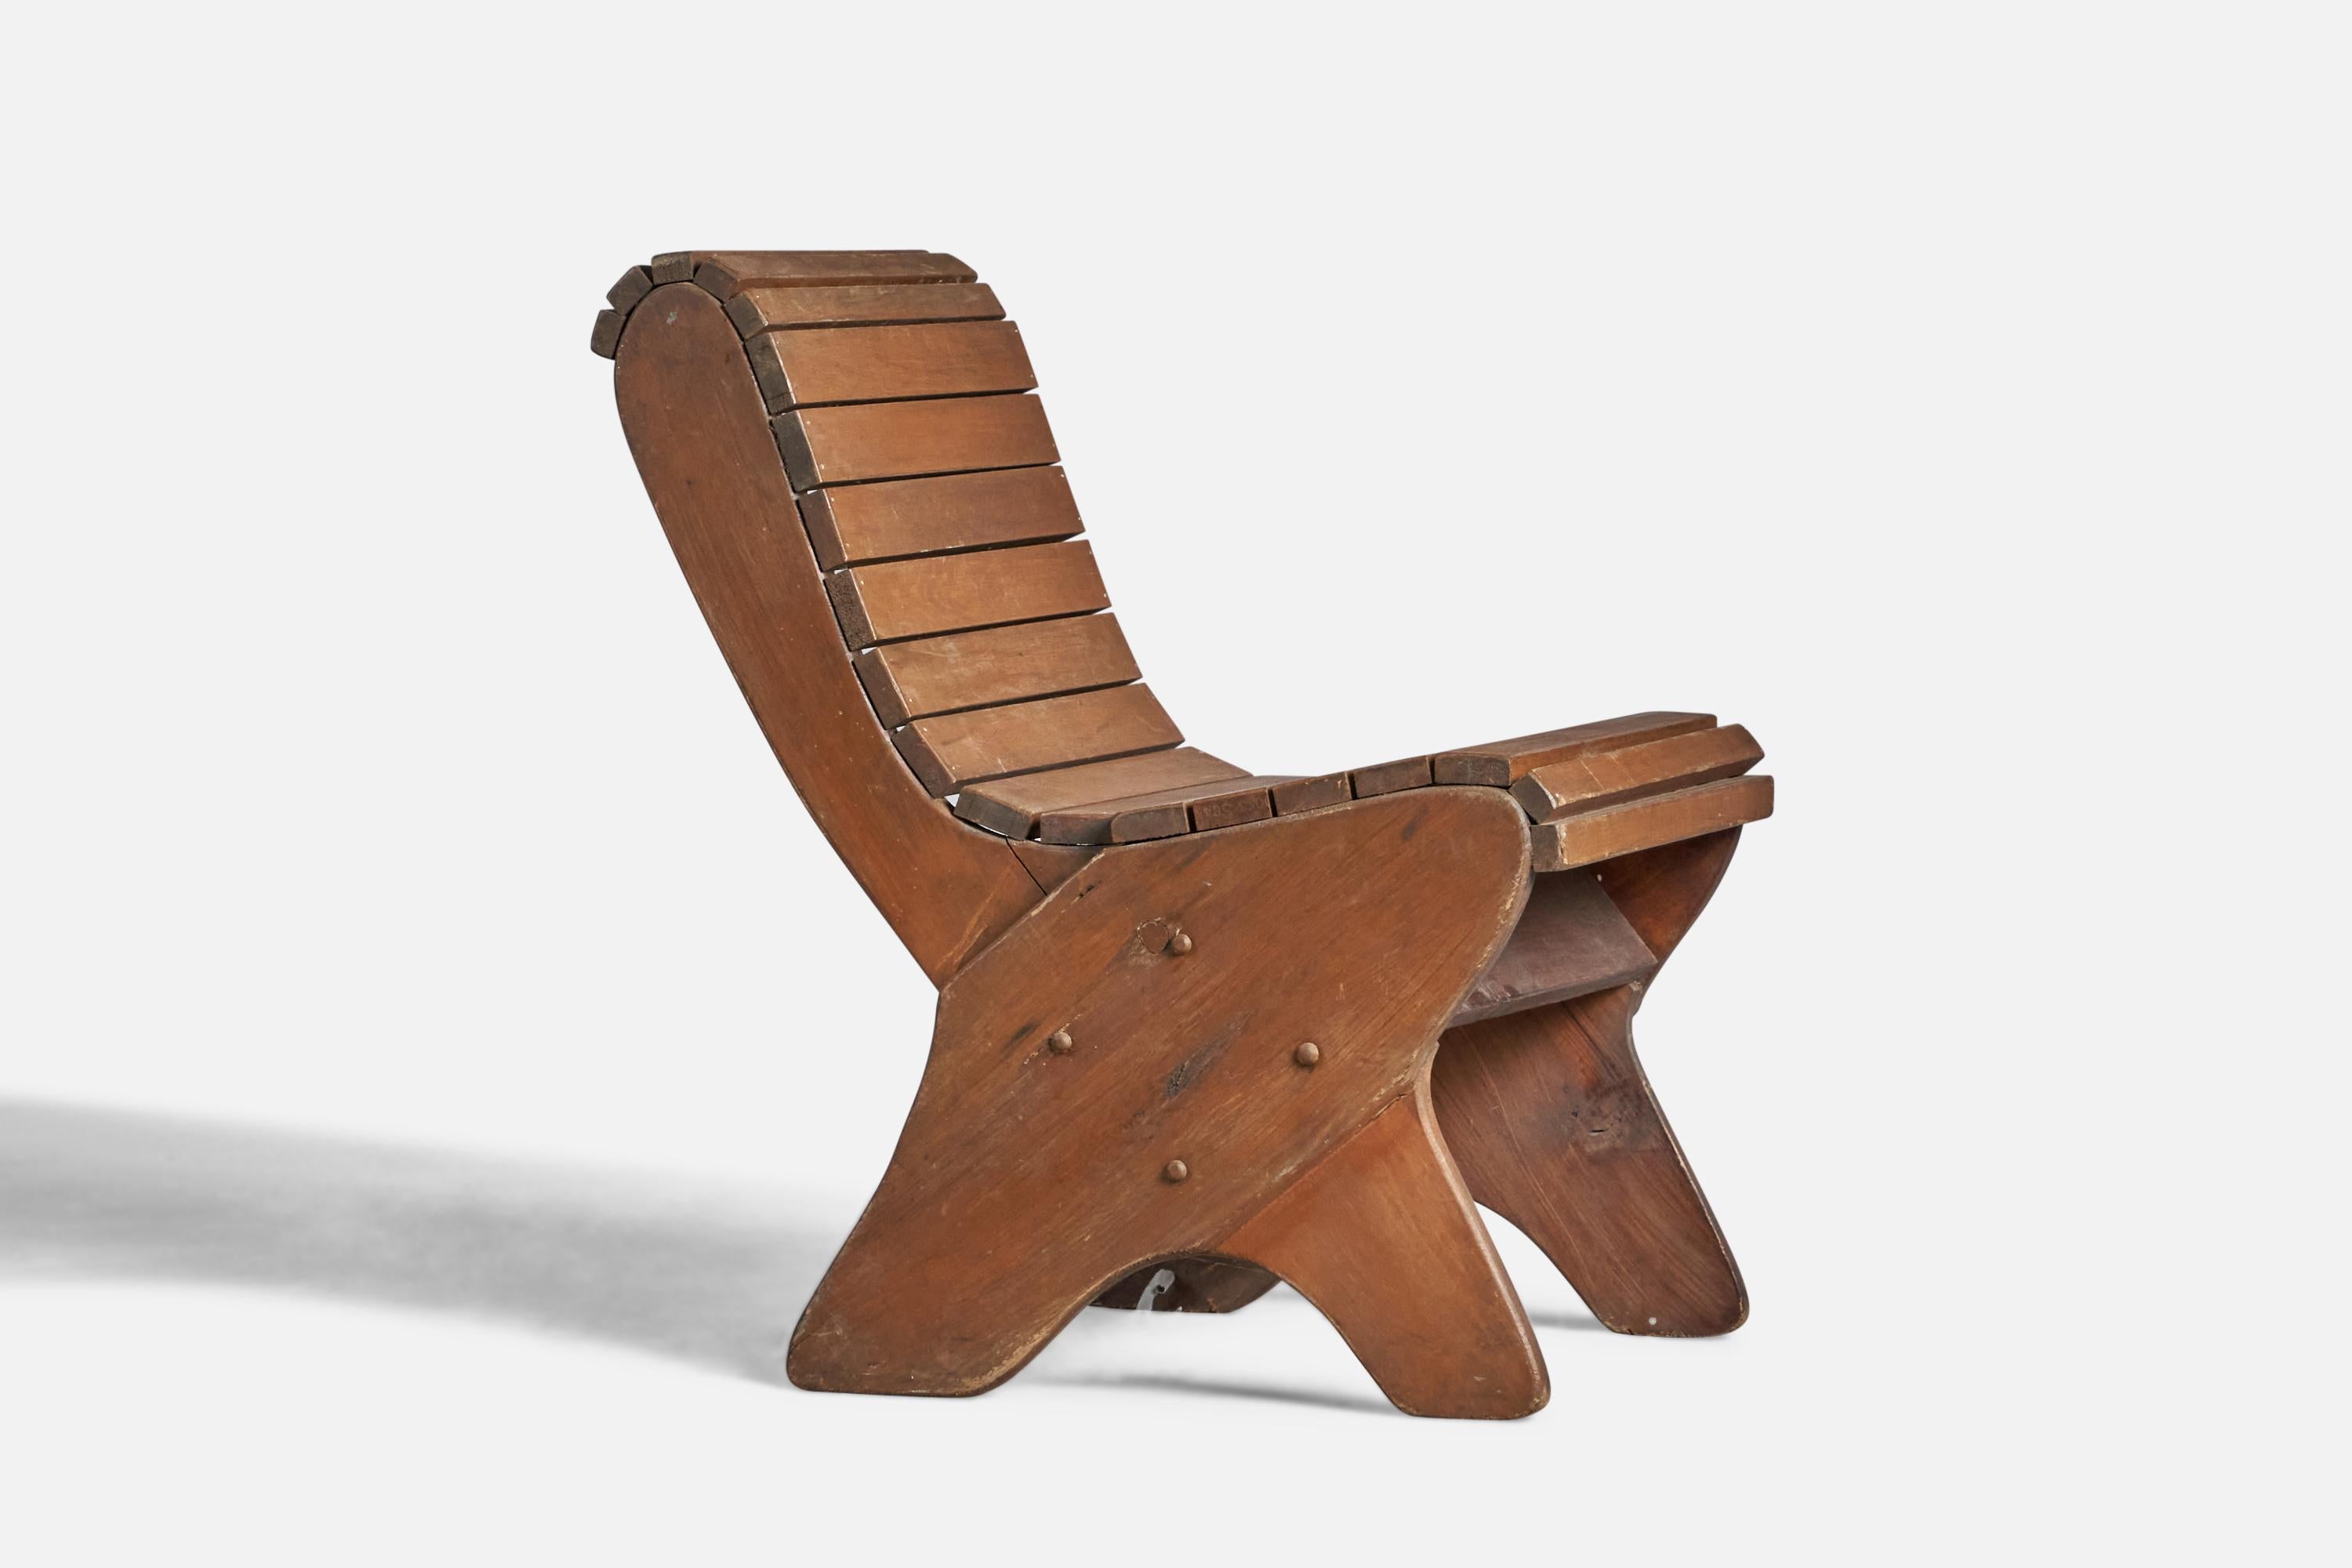 A wood side chair designed and produced in the US, c. 1940s.

15” seat height